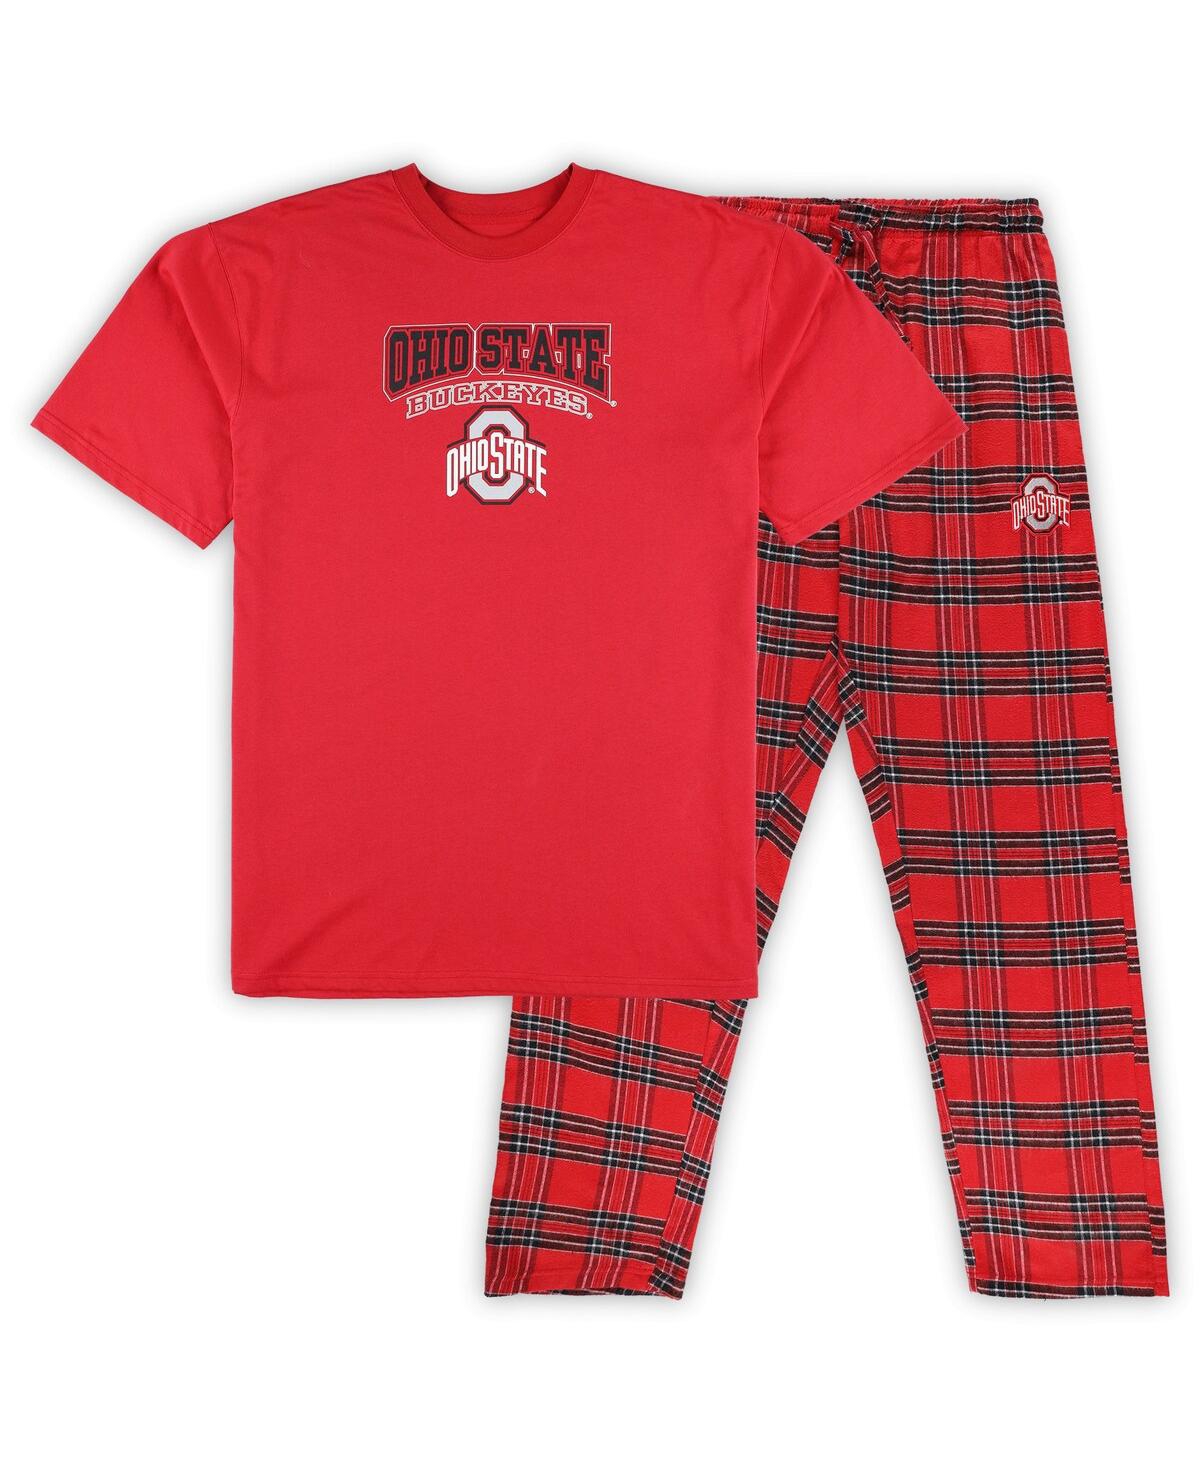 Men's Profile Scarlet, Black Ohio State Buckeyes Big and Tall 2-Pack T-shirt and Flannel Pants Set - Scarlet, Black